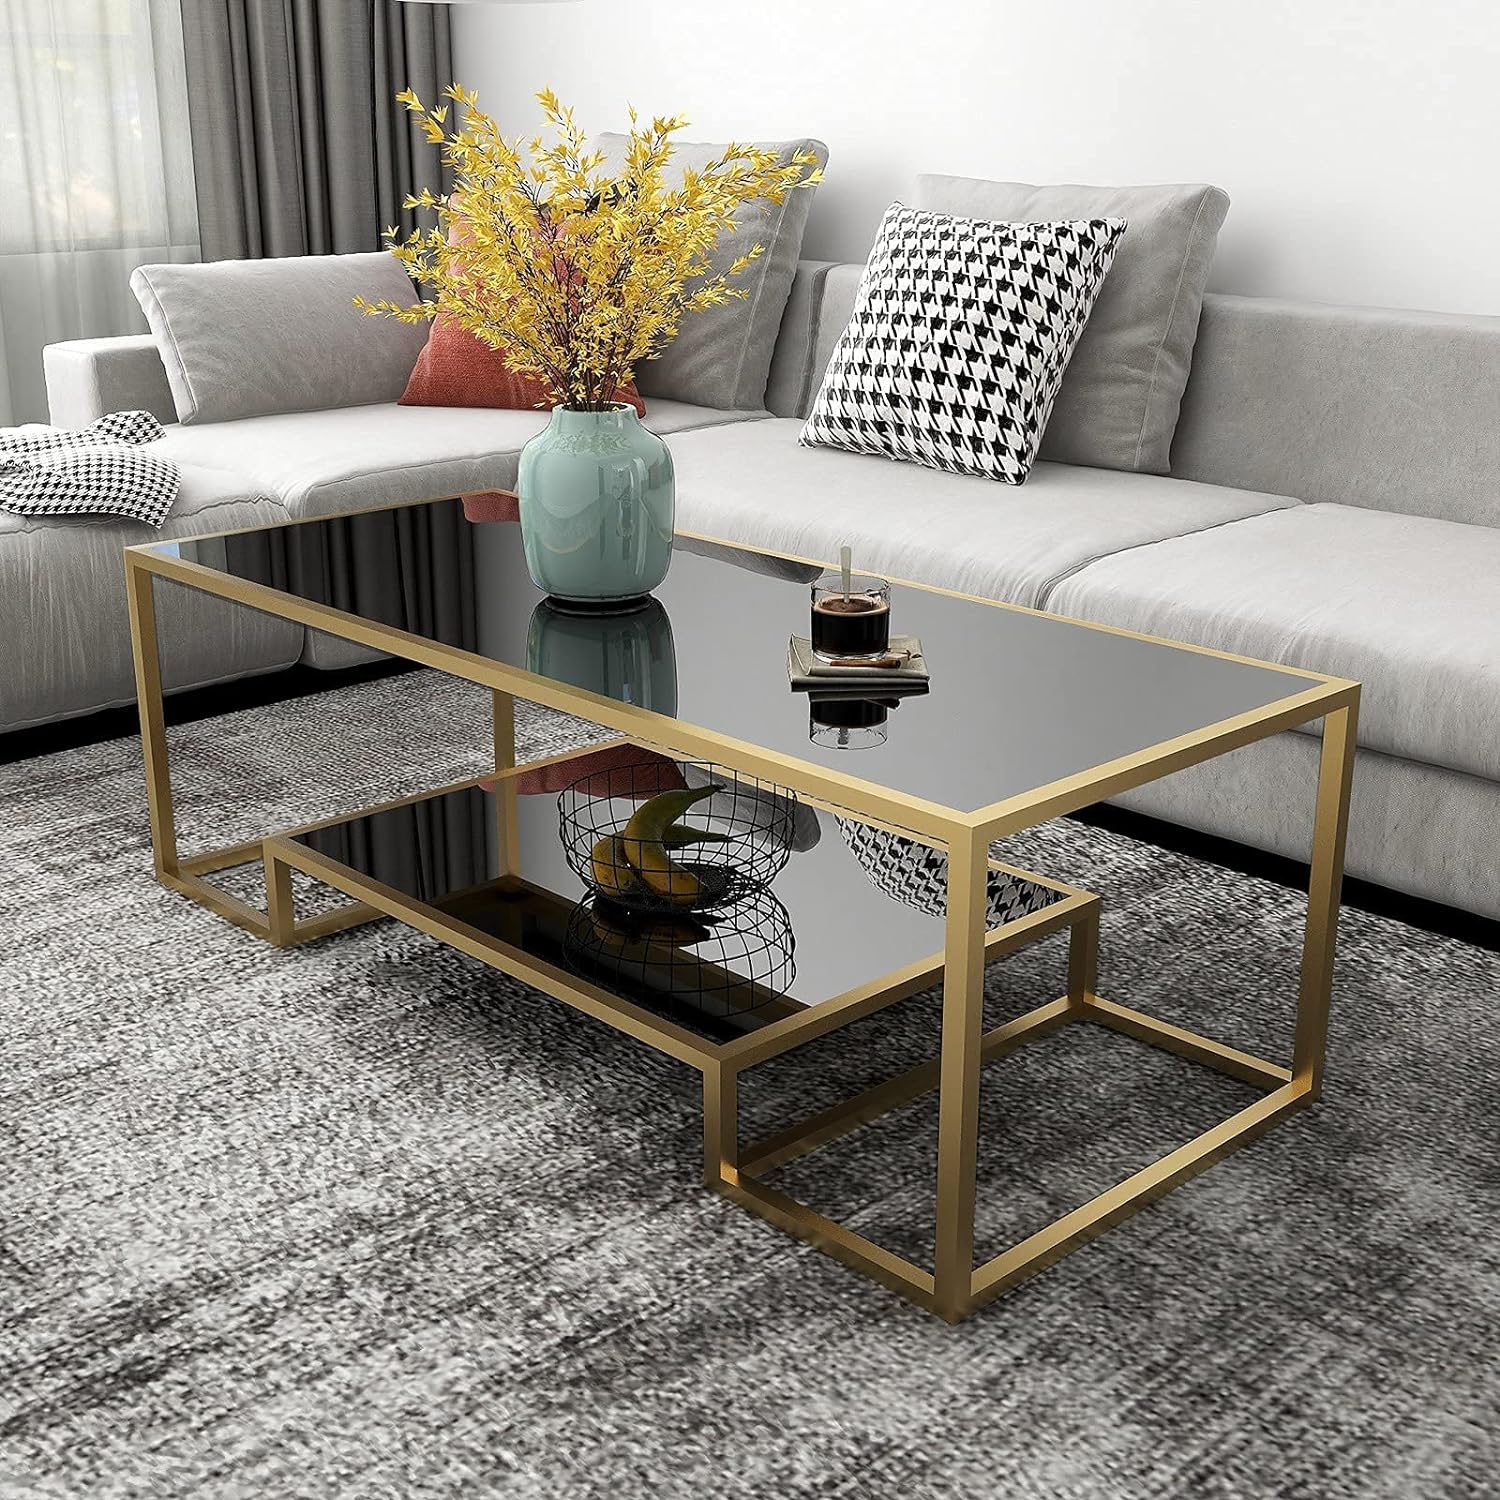 COSVALVE Glass Coffee Table, Brass Accent Modern Tempered Glass Side Table, Additional Storage Shelf & Metal Frame, for Living Room Home Classy Furniture Office Decor